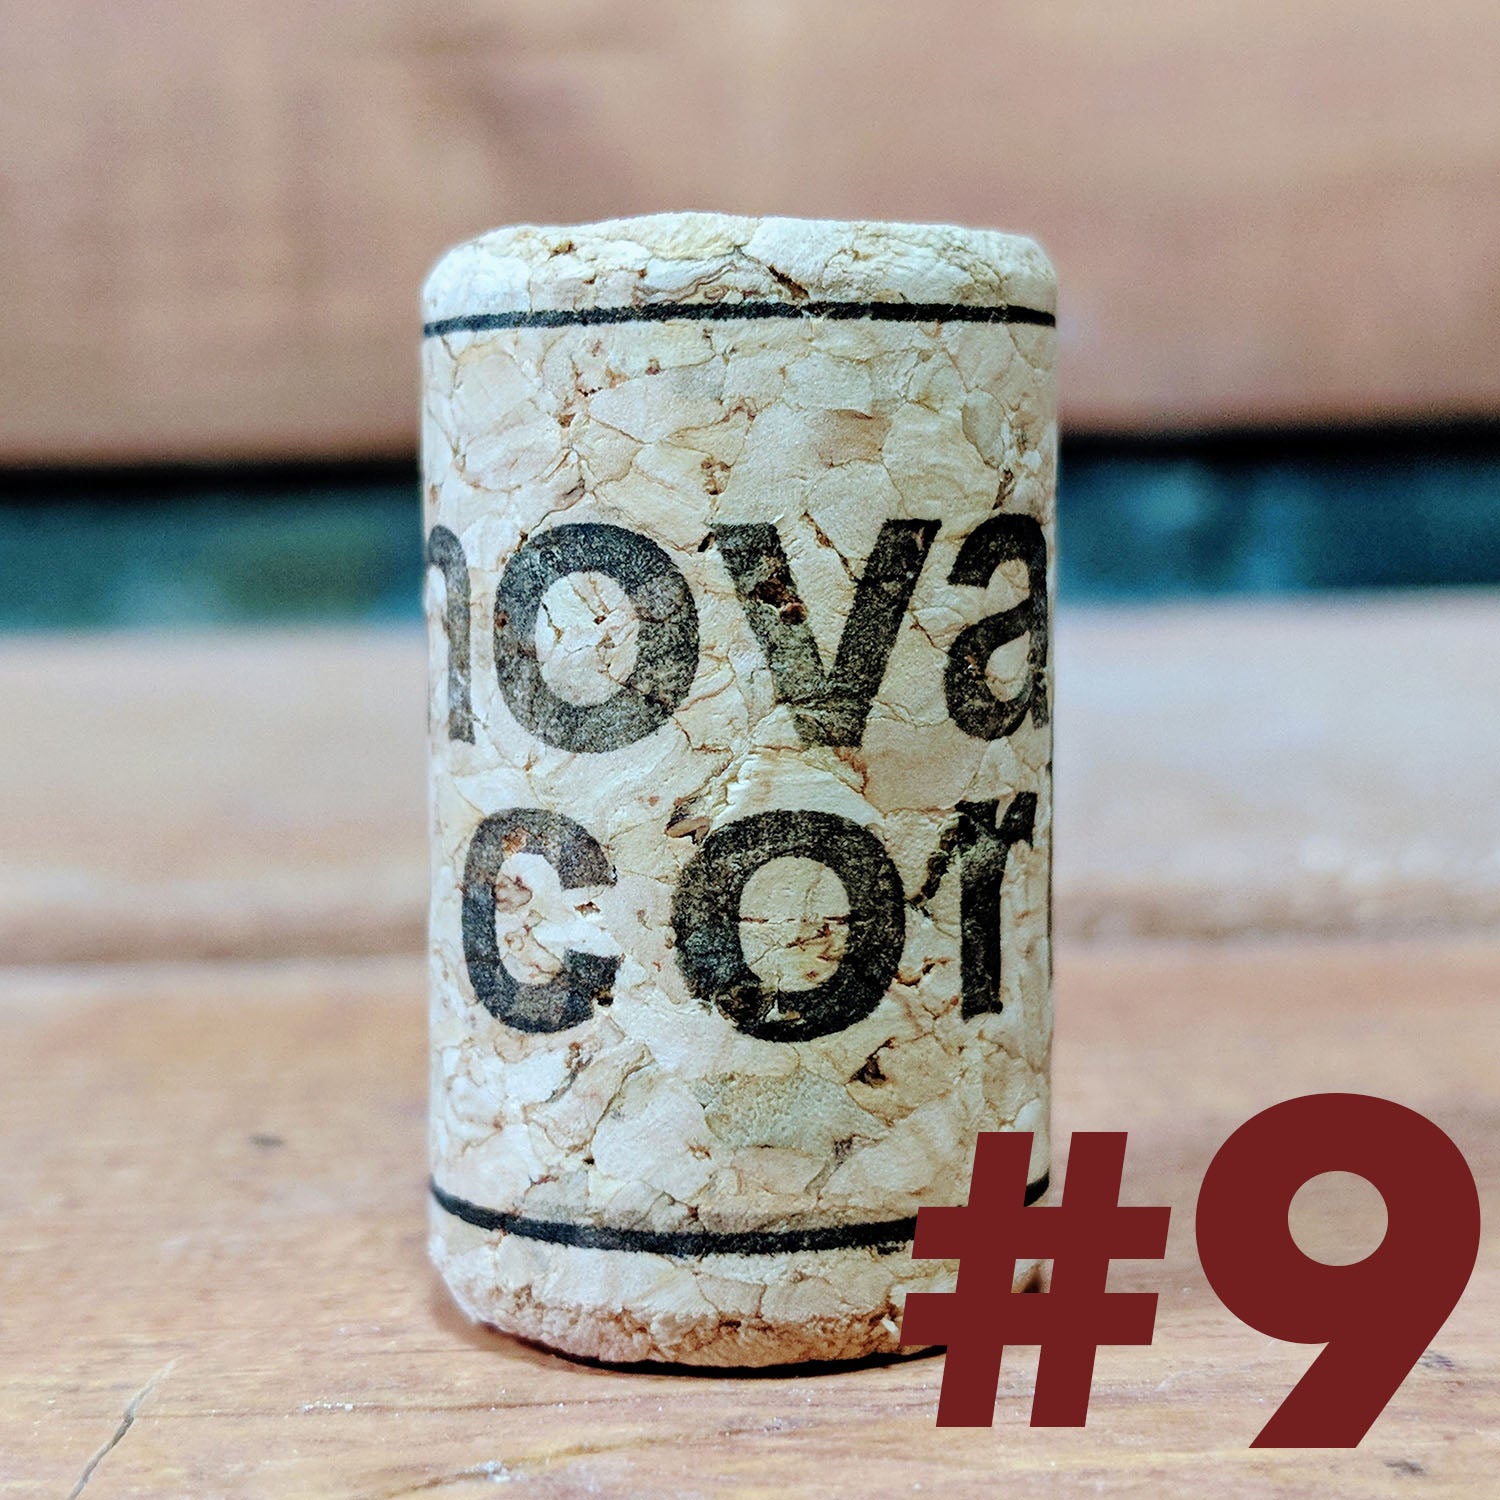 Agglomerated Corks #9